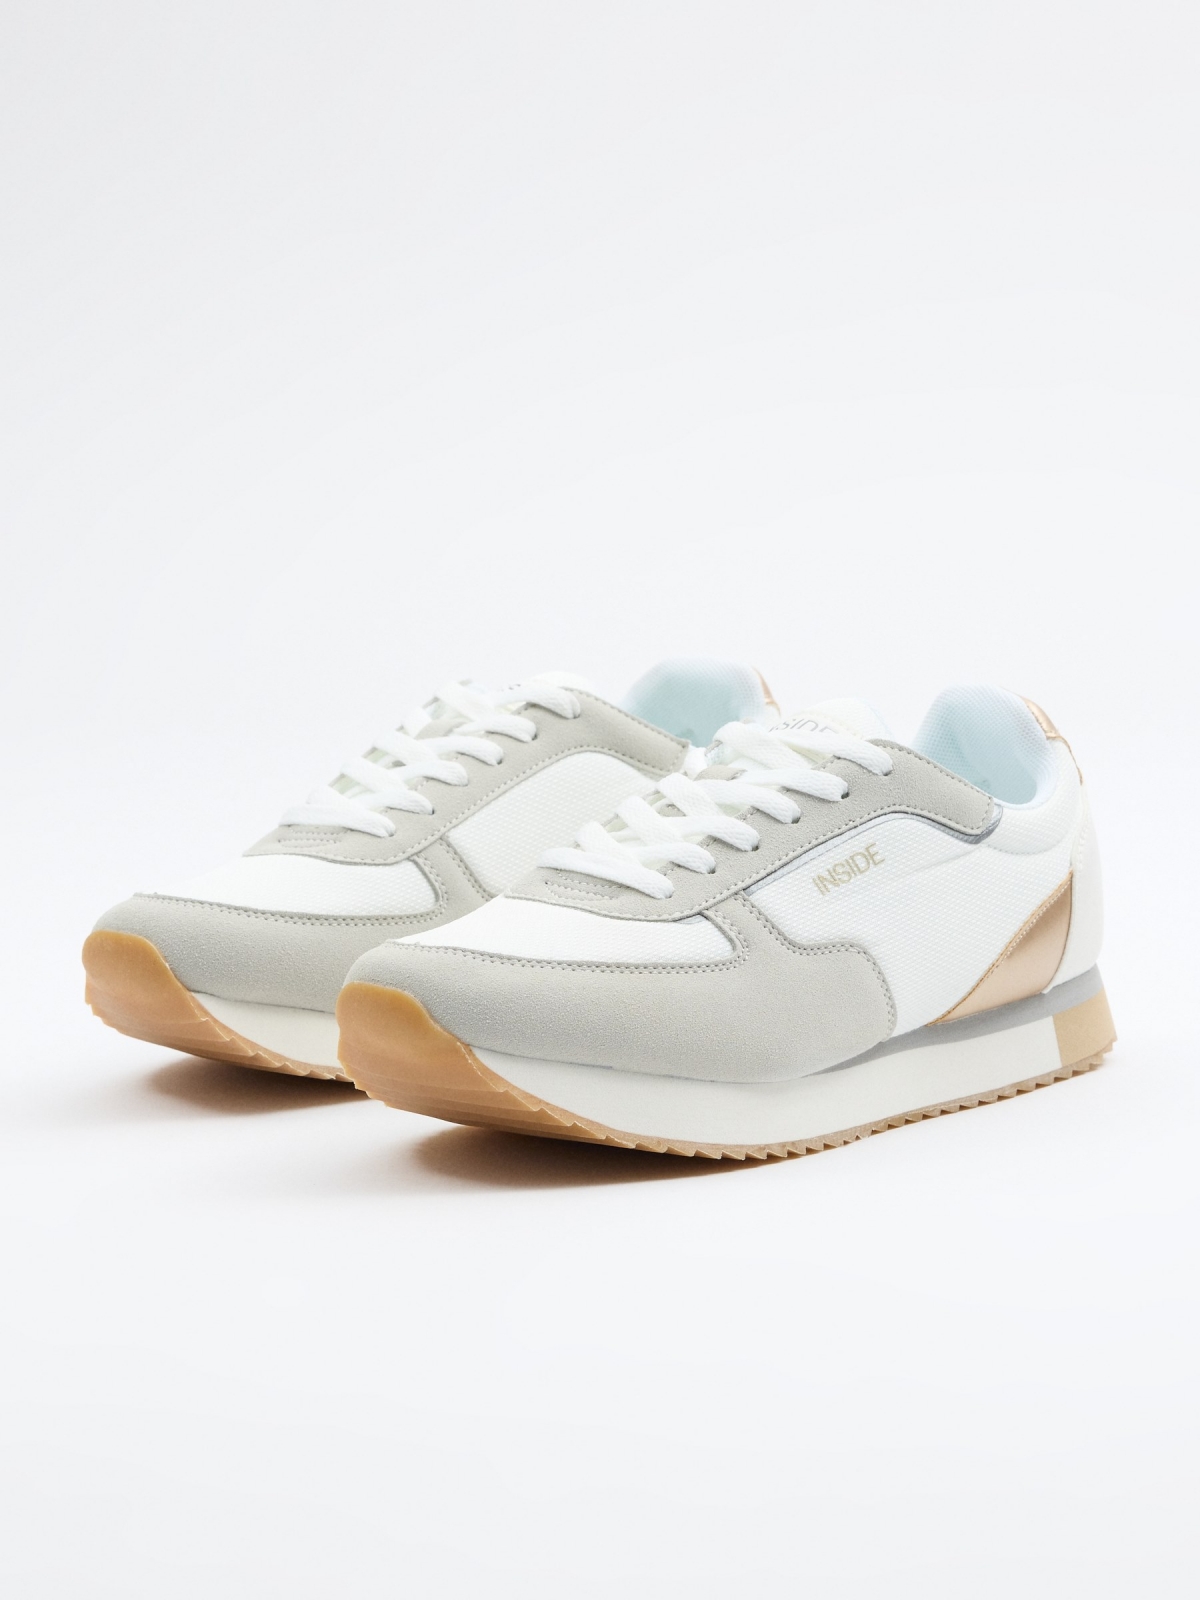 Nylon casual running sneaker off white 45º front view